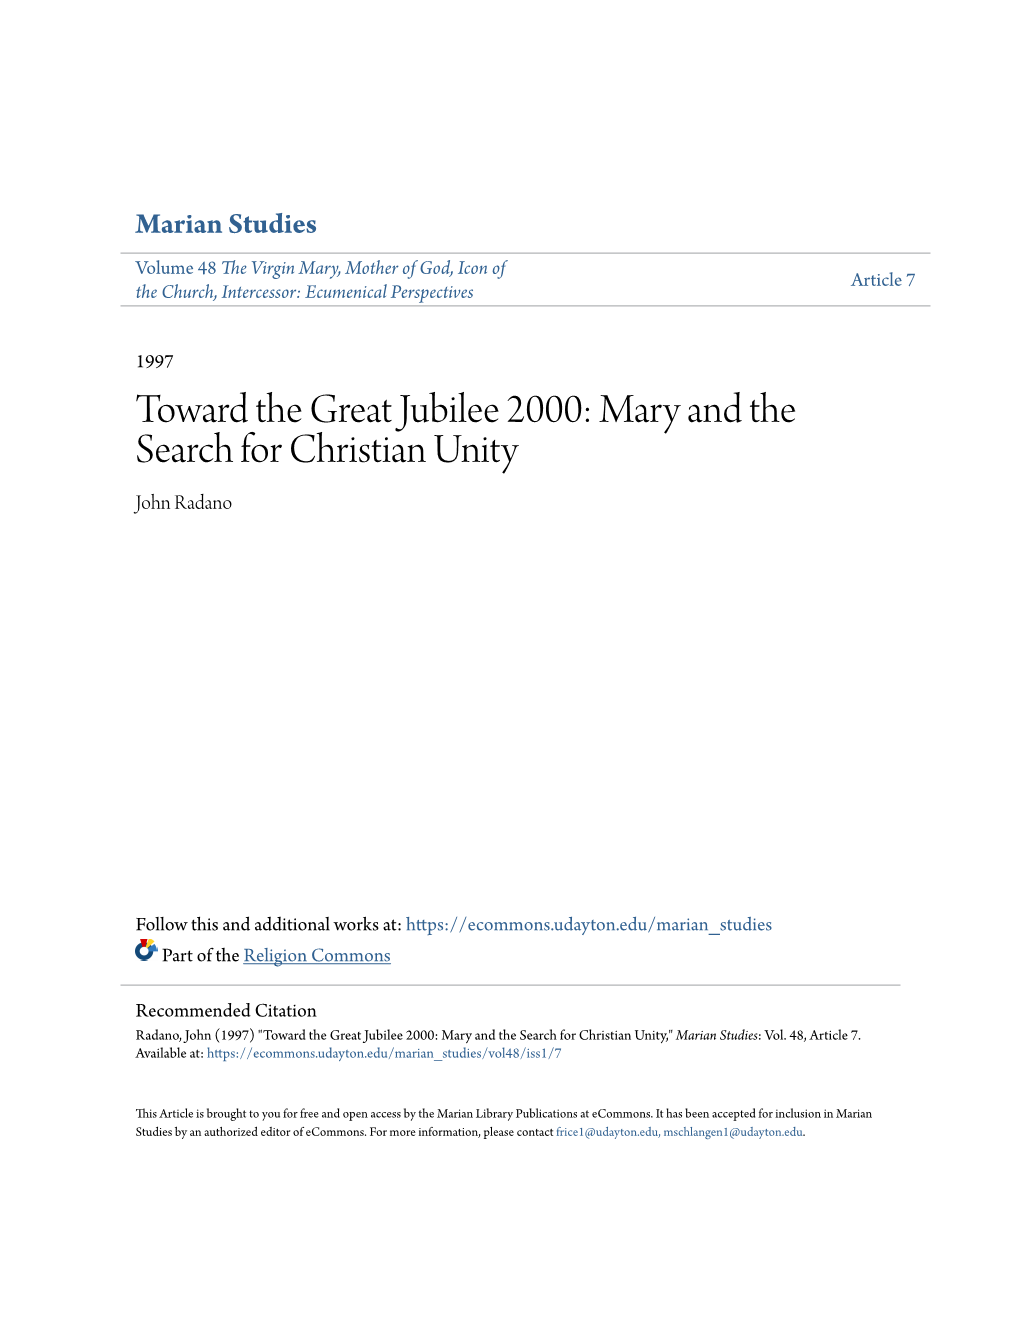 Toward the Great Jubilee 2000: Mary and the Search for Christian Unity John Radano